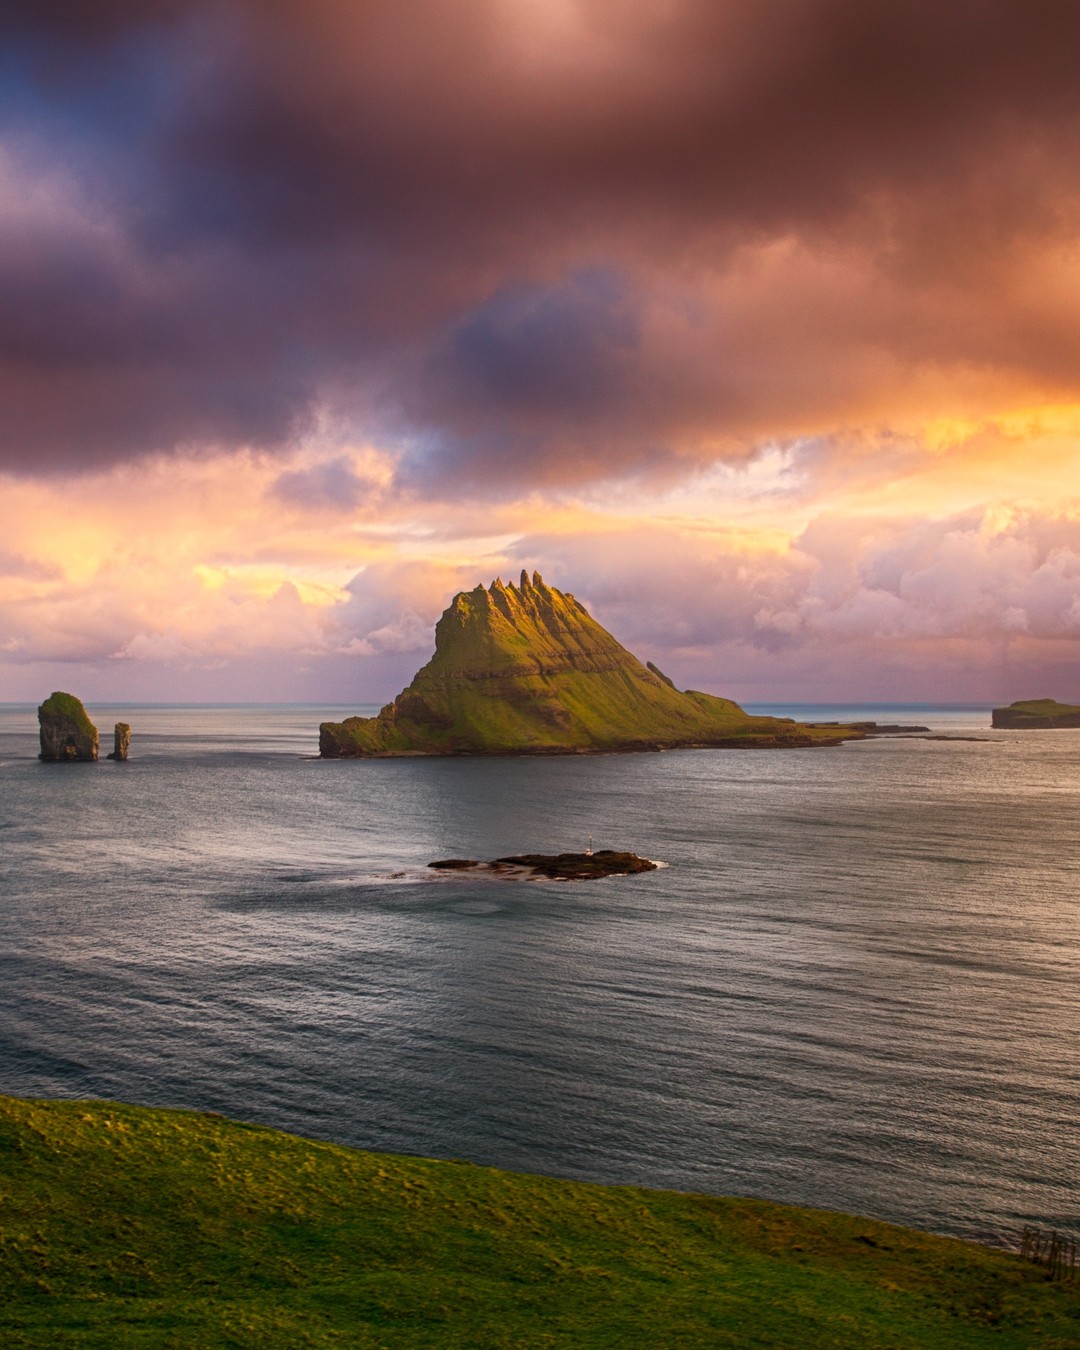 The five-peaked islet of #Tindhólmur on the Faroe Islands during sunset... at 11.13pm!

Deep in the North Atlantic, there is a volcanic archipelago protruding from the untamed waters between Iceland and Norway. This remote clasp of 18 basalt rocks make up the Faroe Islands and are home to stirring fjords, dramatic cliffs and sweeping glaciated valleys.

These islands are repeatedly and relentlessly buffeted by the swells and squalls of the tempestuous Atlantic Ocean. As such, the @visitfaroeislands feature some seriously exciting hiking trails with equally extraordinary scenery.
-⠀
-⠀
-⠀
-⠀
-⠀
-⠀
#faroeislands #visitfaroeislands #atlanticairways #Múlafossur #faroes #faroe #Vágar #lonelyplanet #lppathfinders  #vagar #drangarnir #guidetofaroeislands